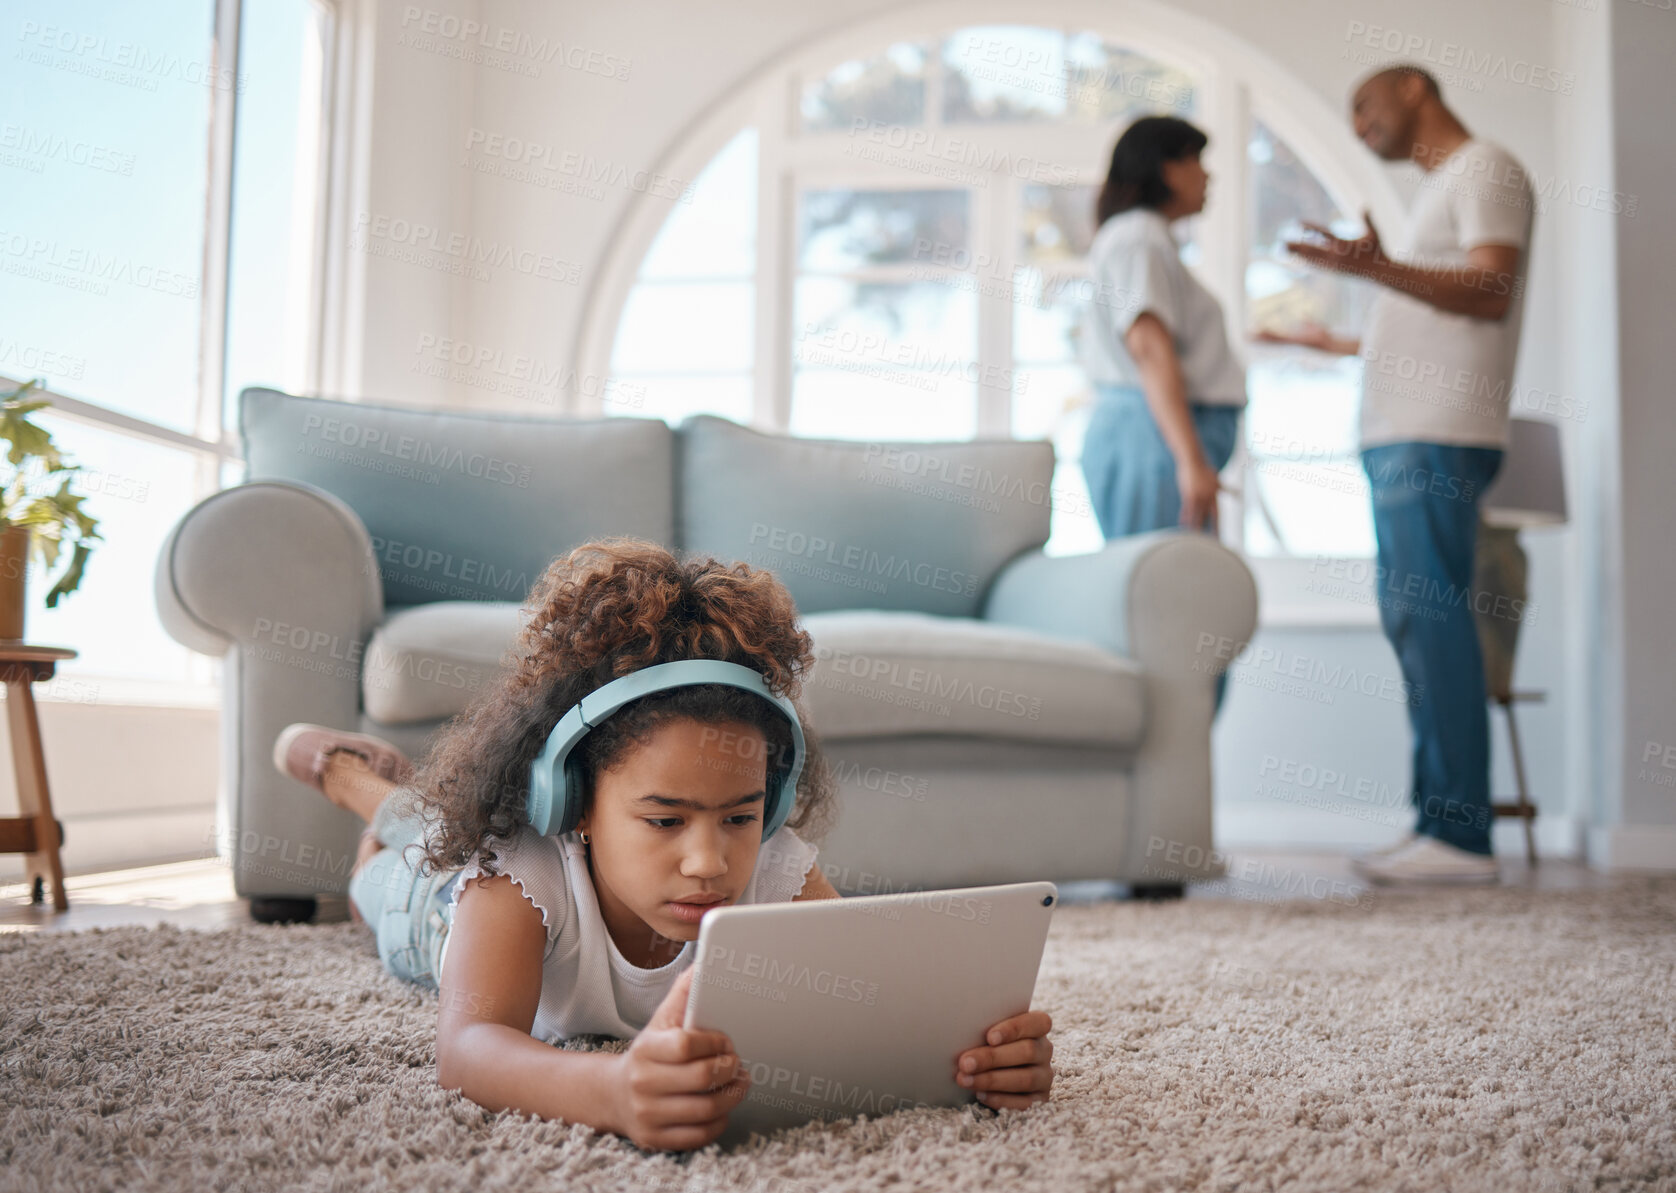 Buy stock photo Shot of a young girl using a digital tablet while her parents argue